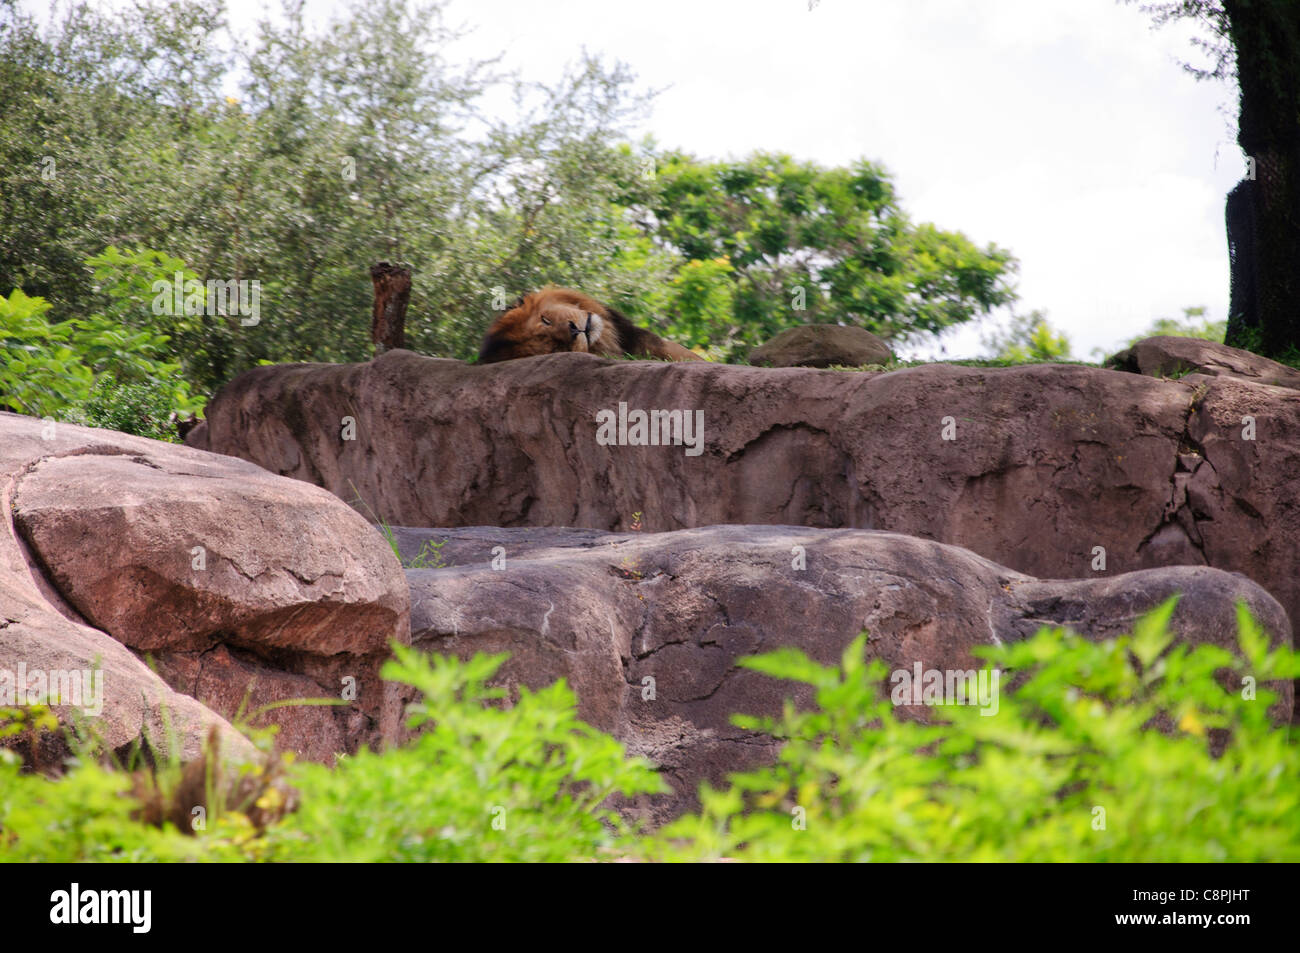 Kilimanjaro  safari in animal kingdom florida, various animals and close ups including the in truck view of the tour Stock Photo